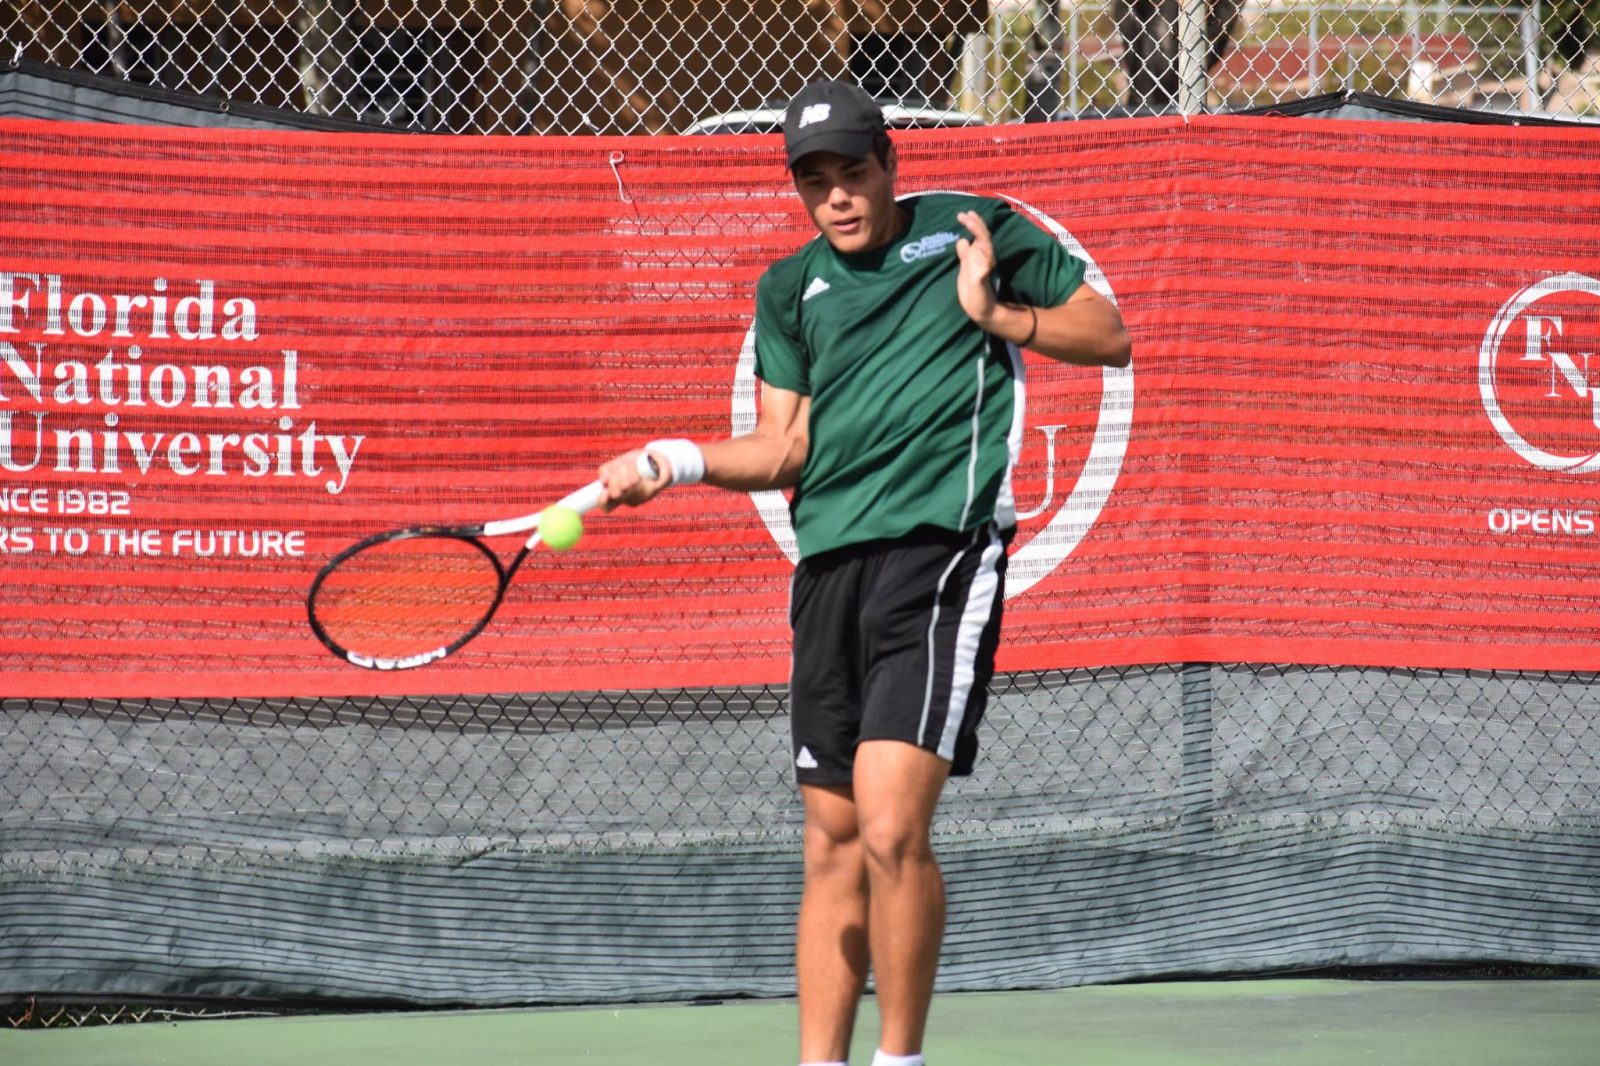 FNU Tennis player Geronimo Vivero in action in the game